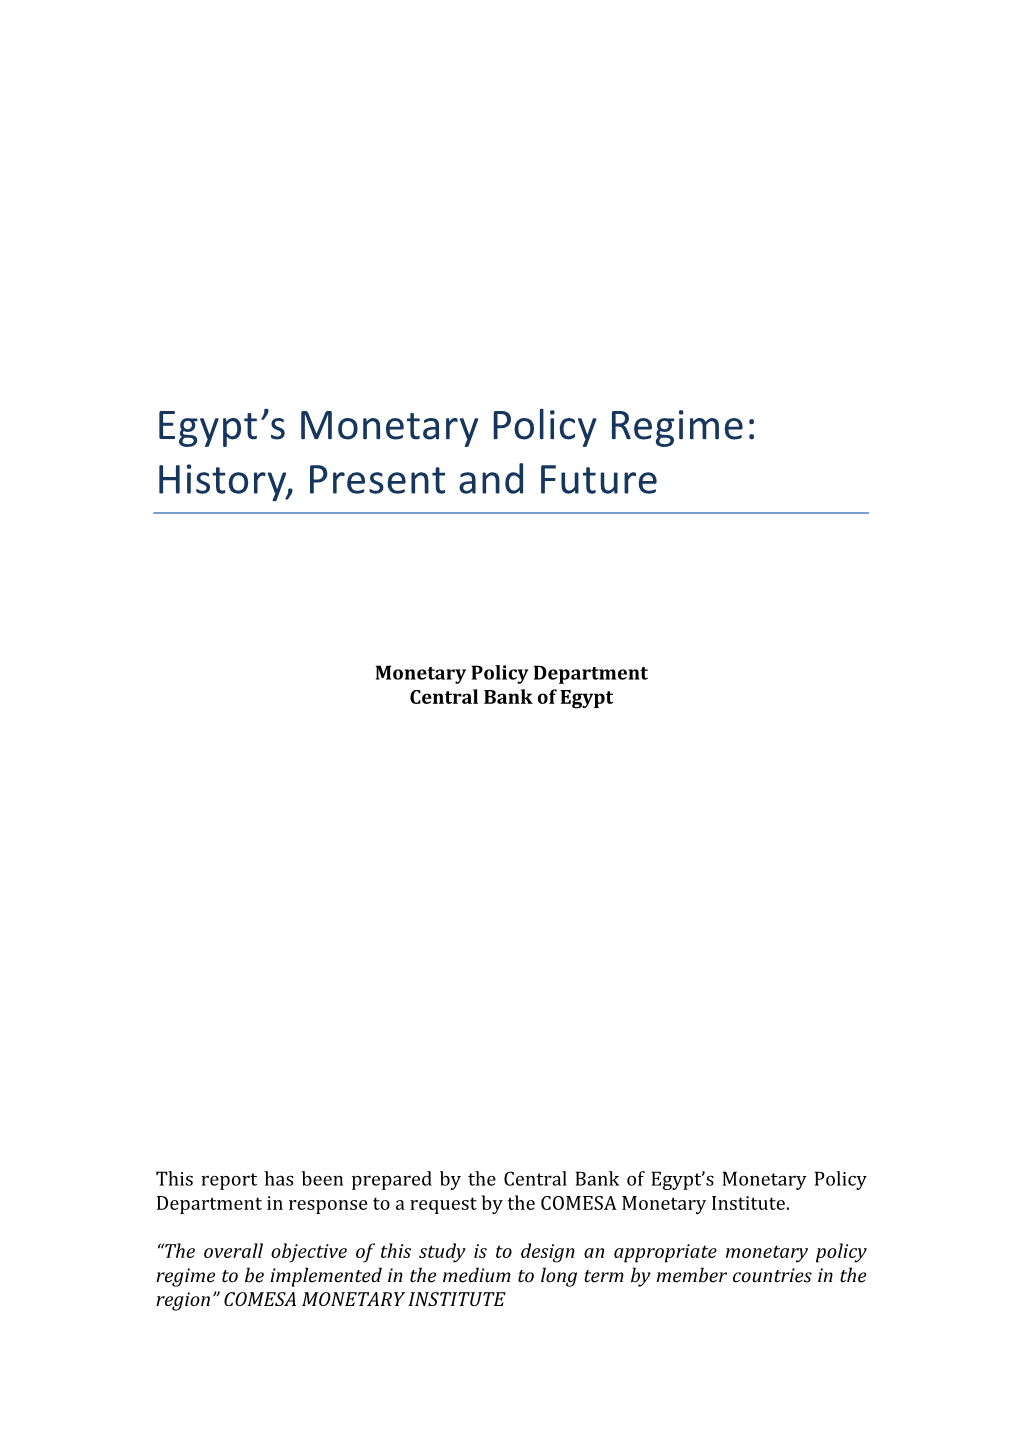 Egypt's Monetary Policy Regime: History, Present and Future